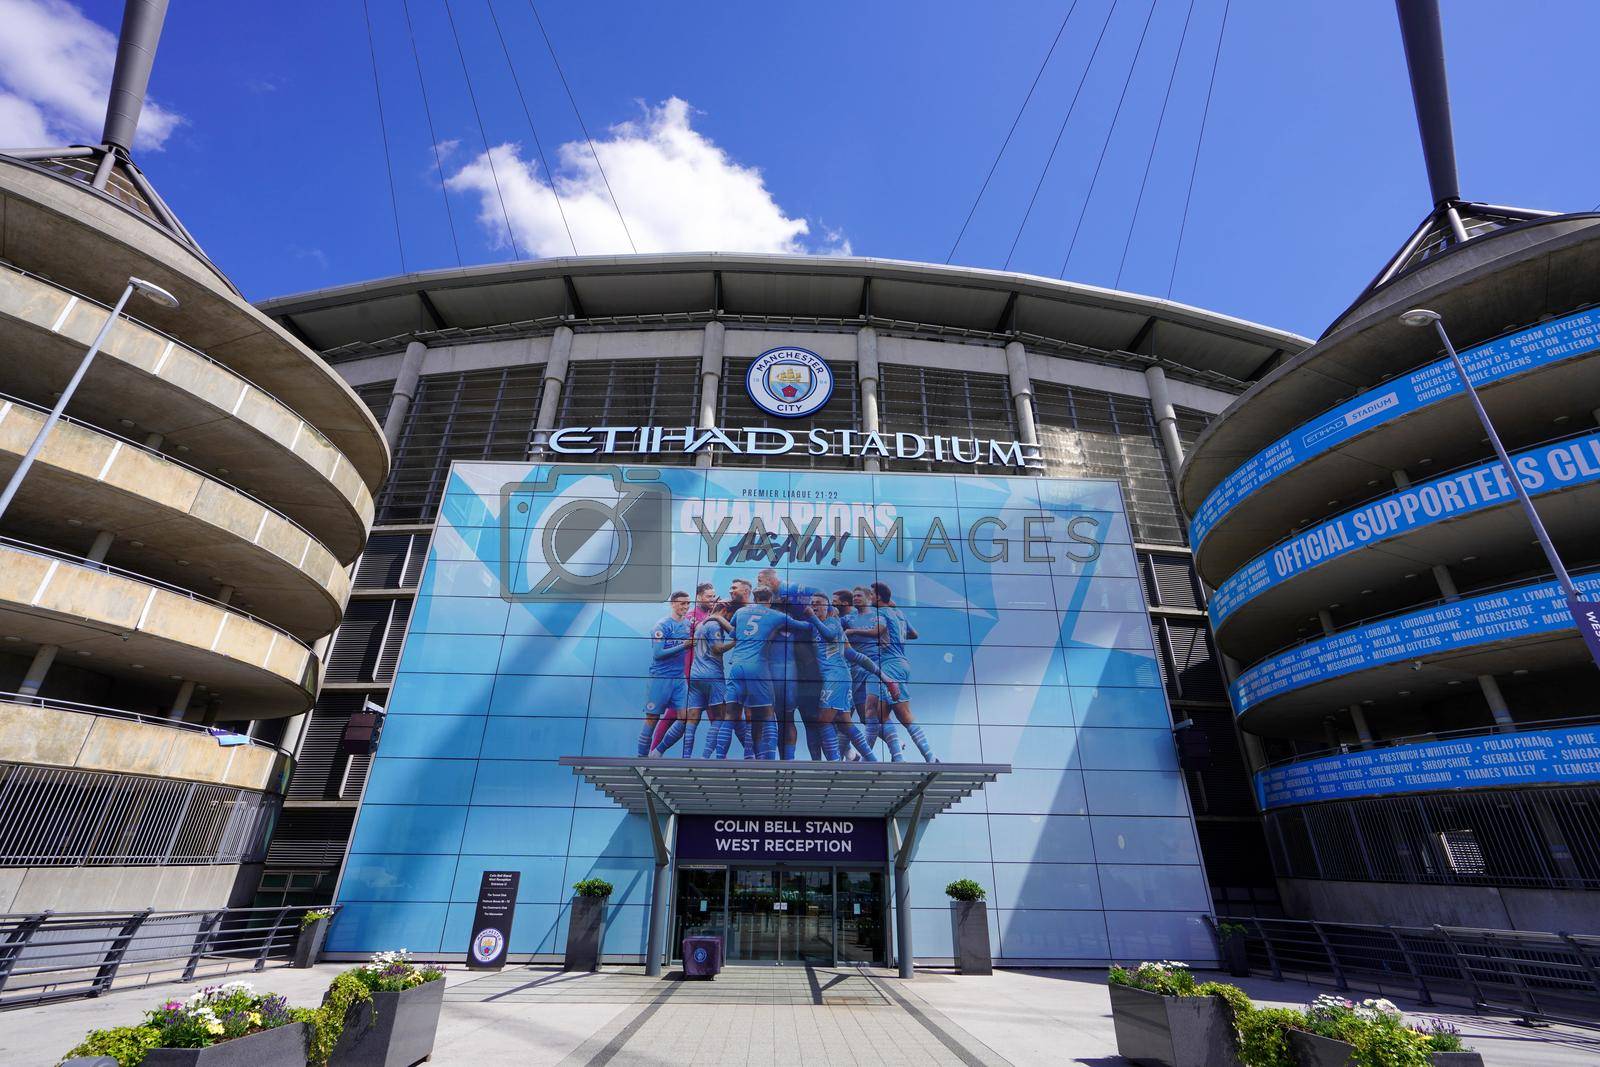 MANCHESTER, UNITED KINGDOM - JULY 13, 2022: facade of City of Manchester Stadium also known Etihad Stadium the home ground of Manchester City FC